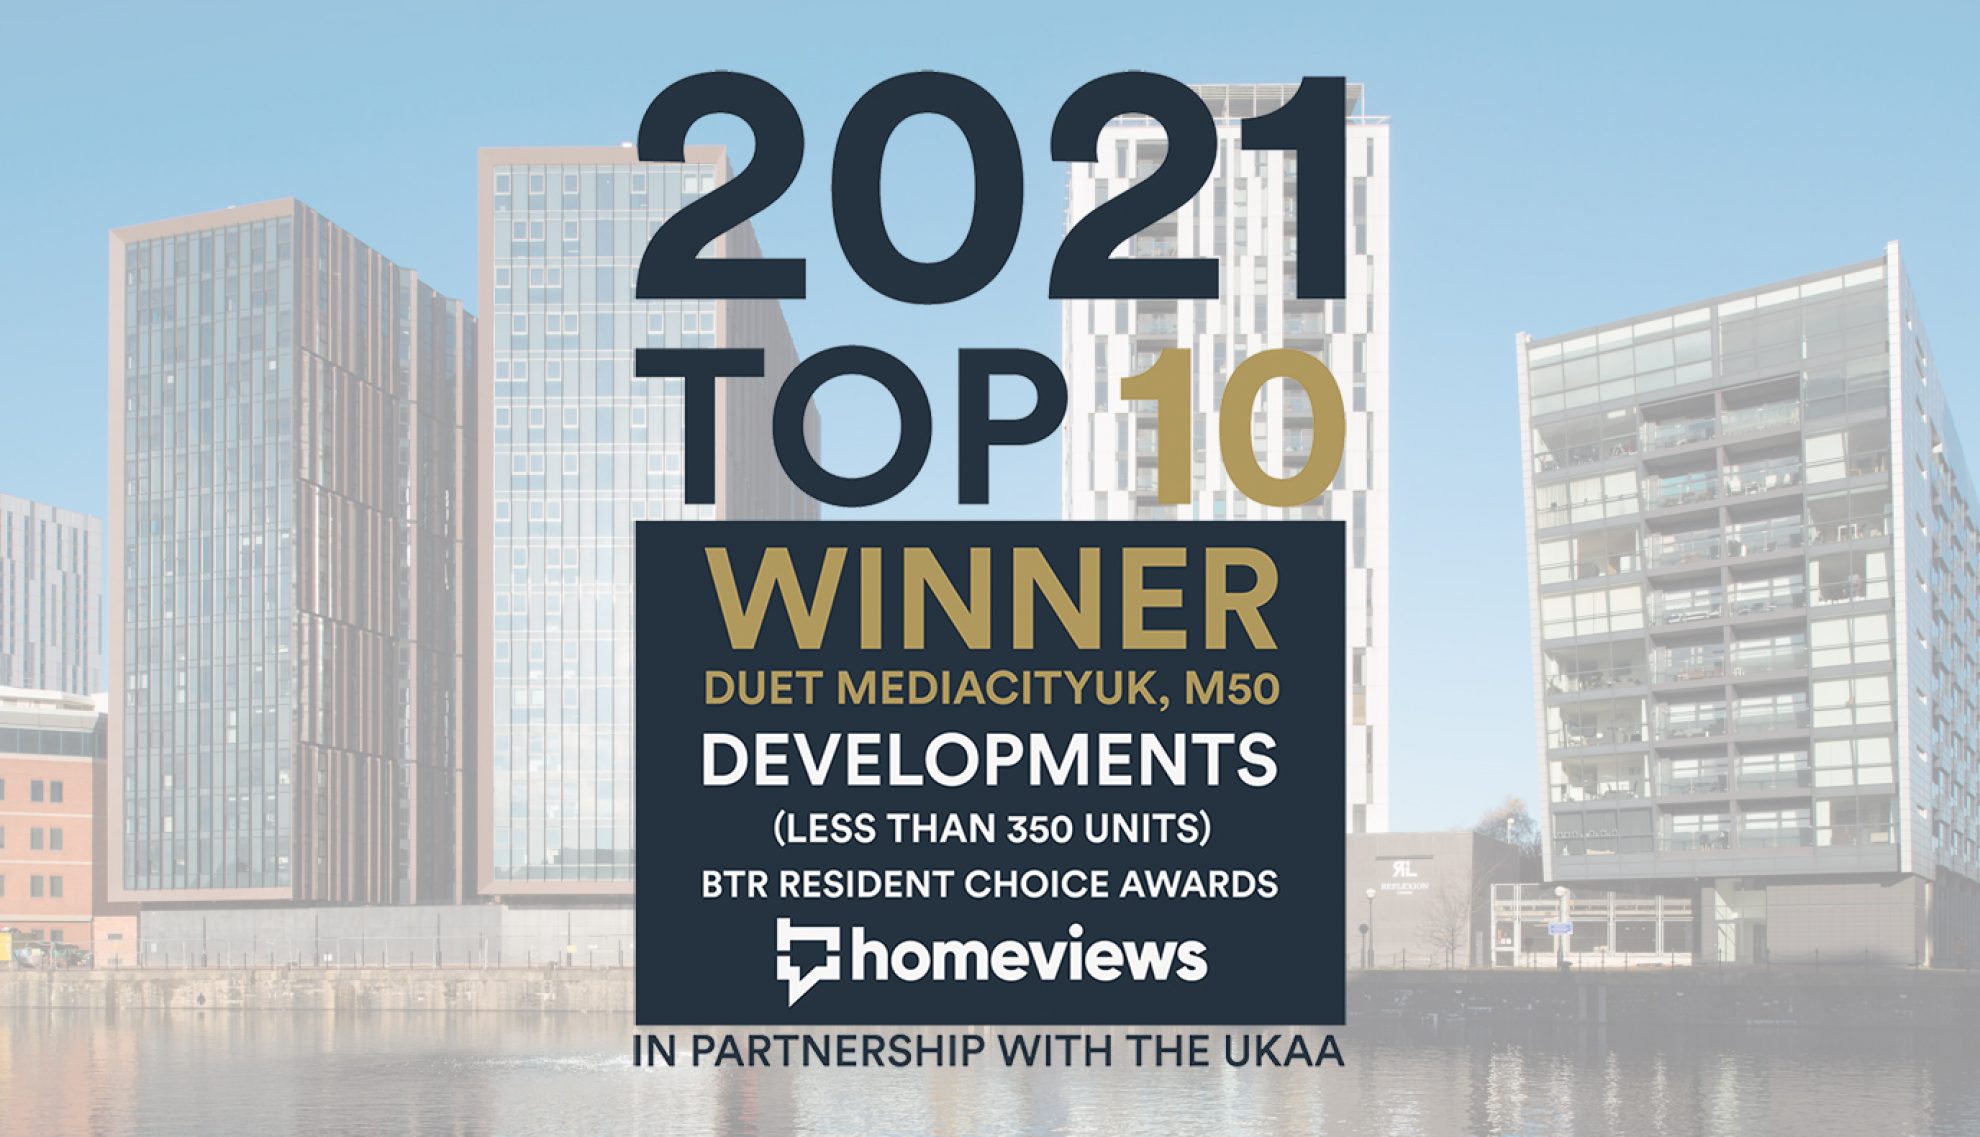 Build to Rent Awards 2021: Top 10 National Developments (less than 350 units)